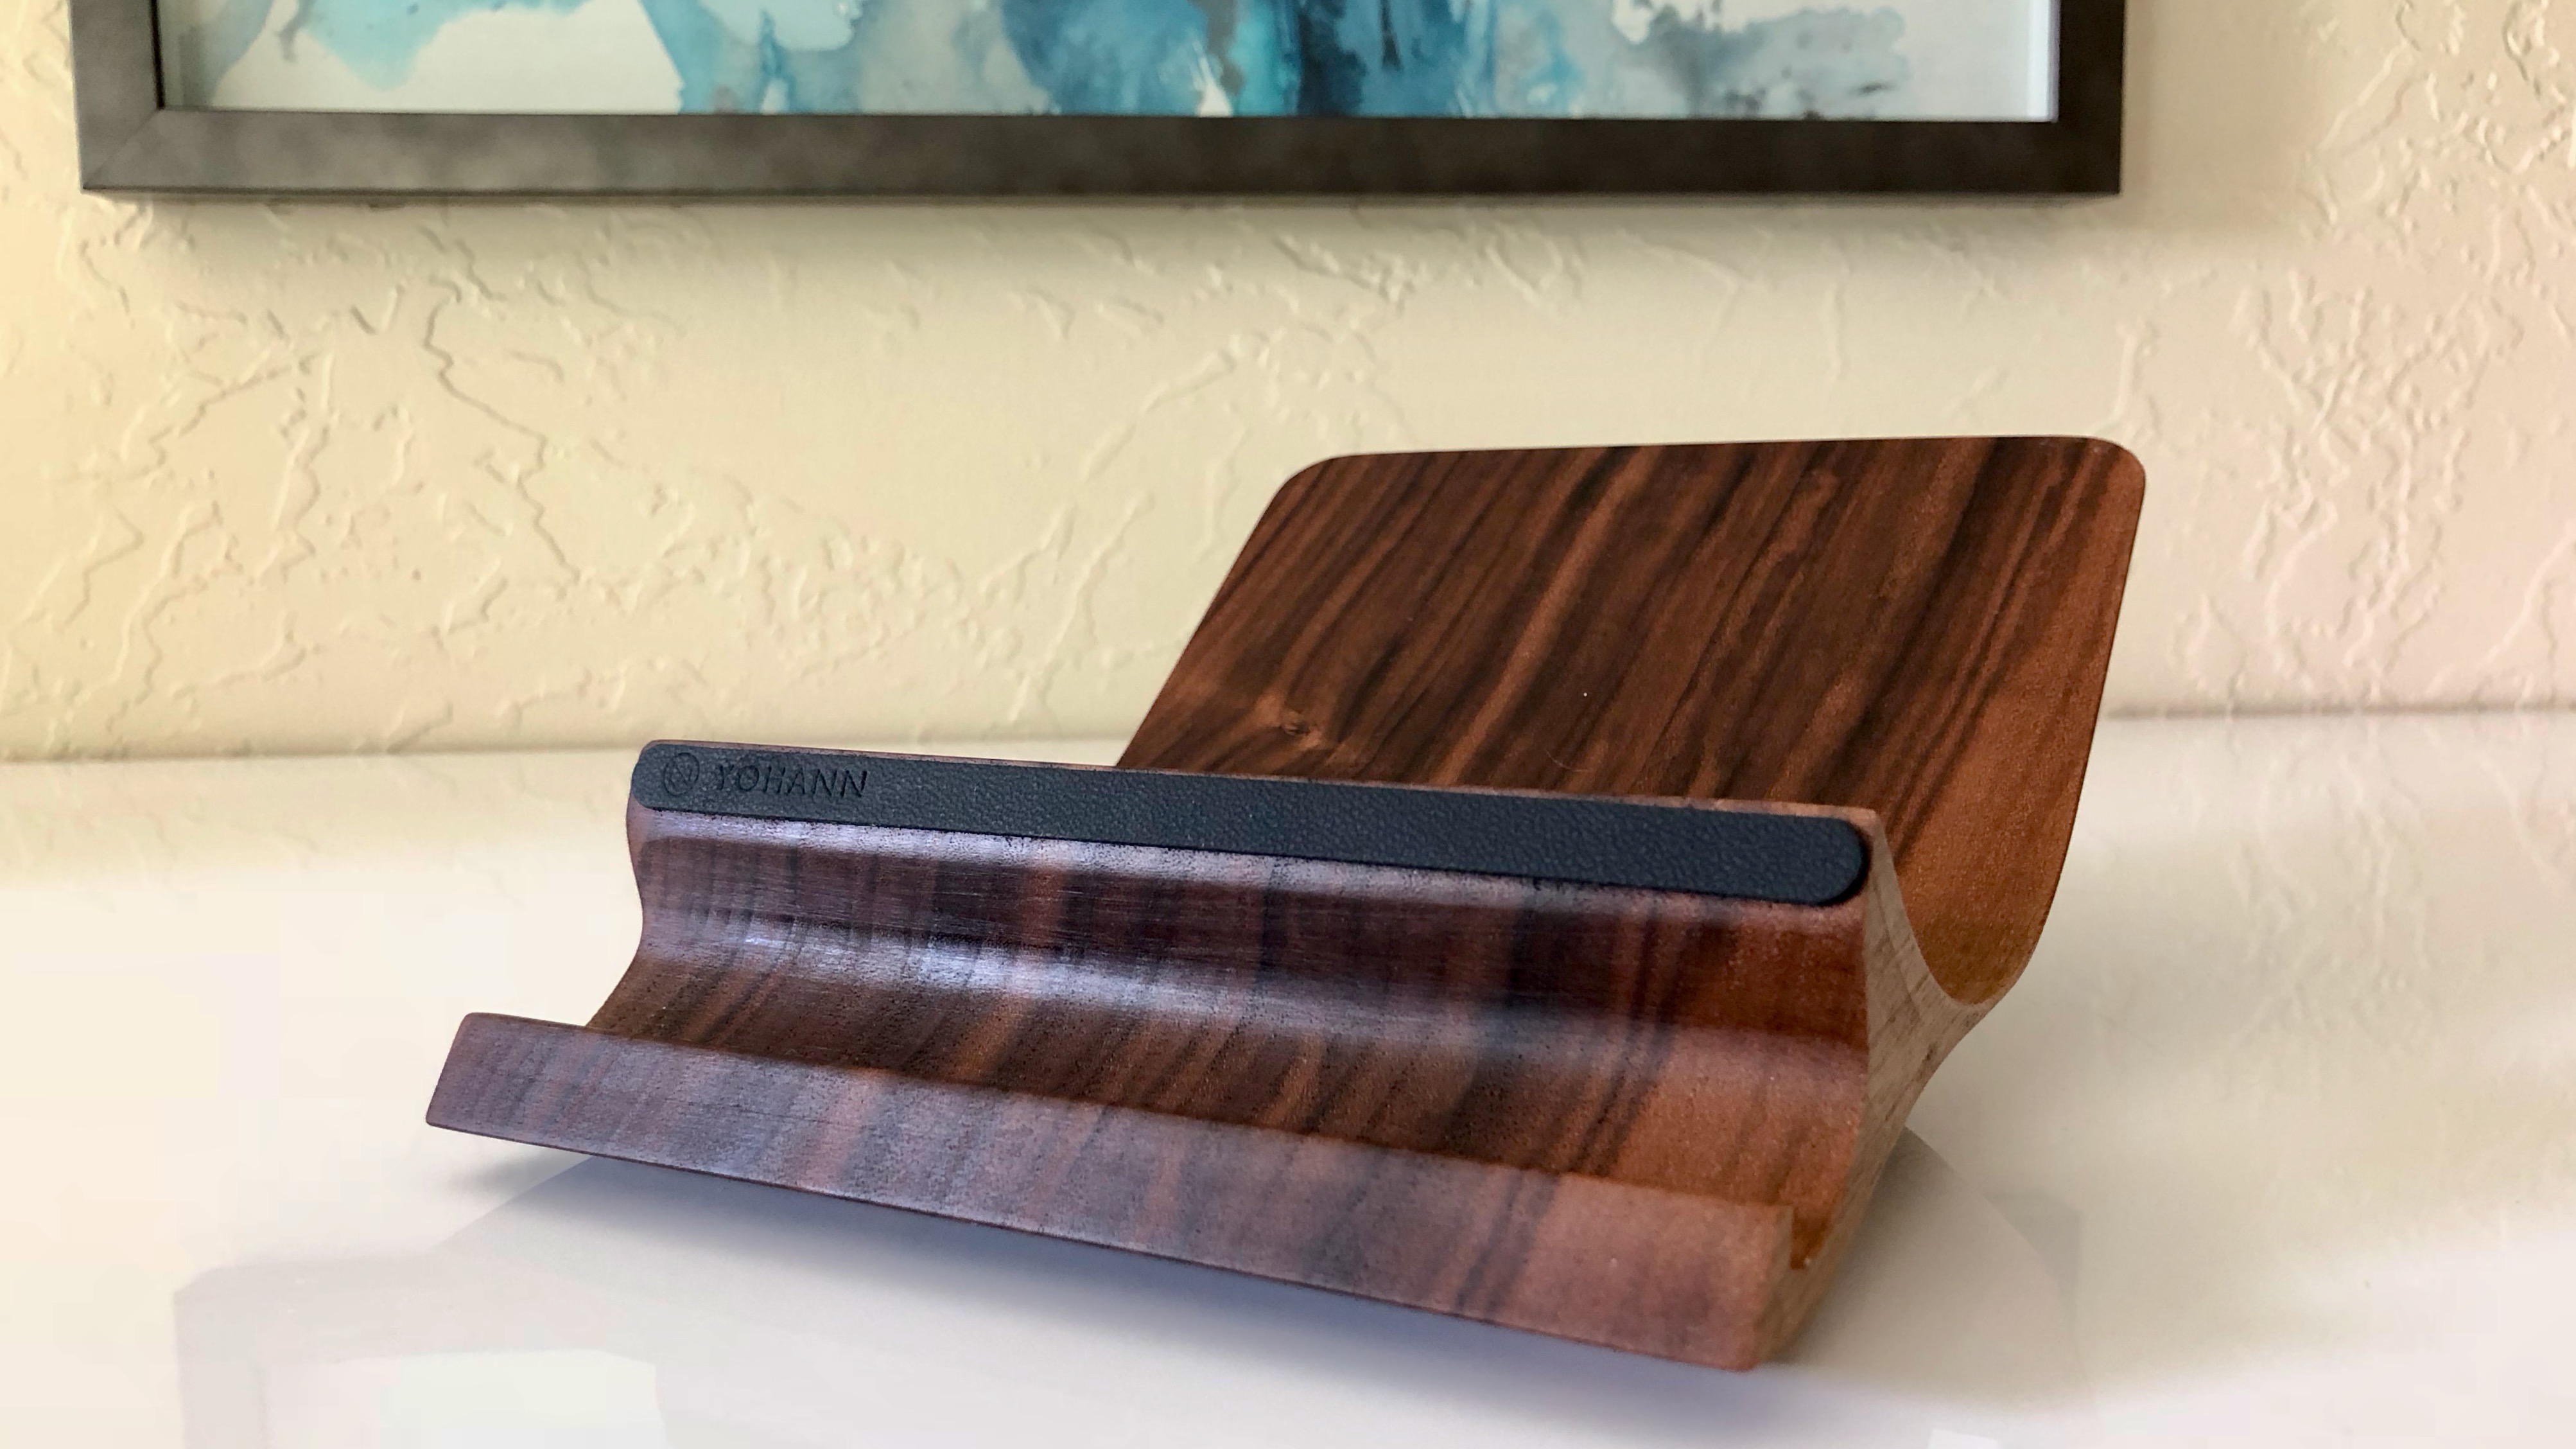 Review: Yohann's MacBook Pro and MacBook Stand is a beautiful addition to  your setup - 9to5Mac